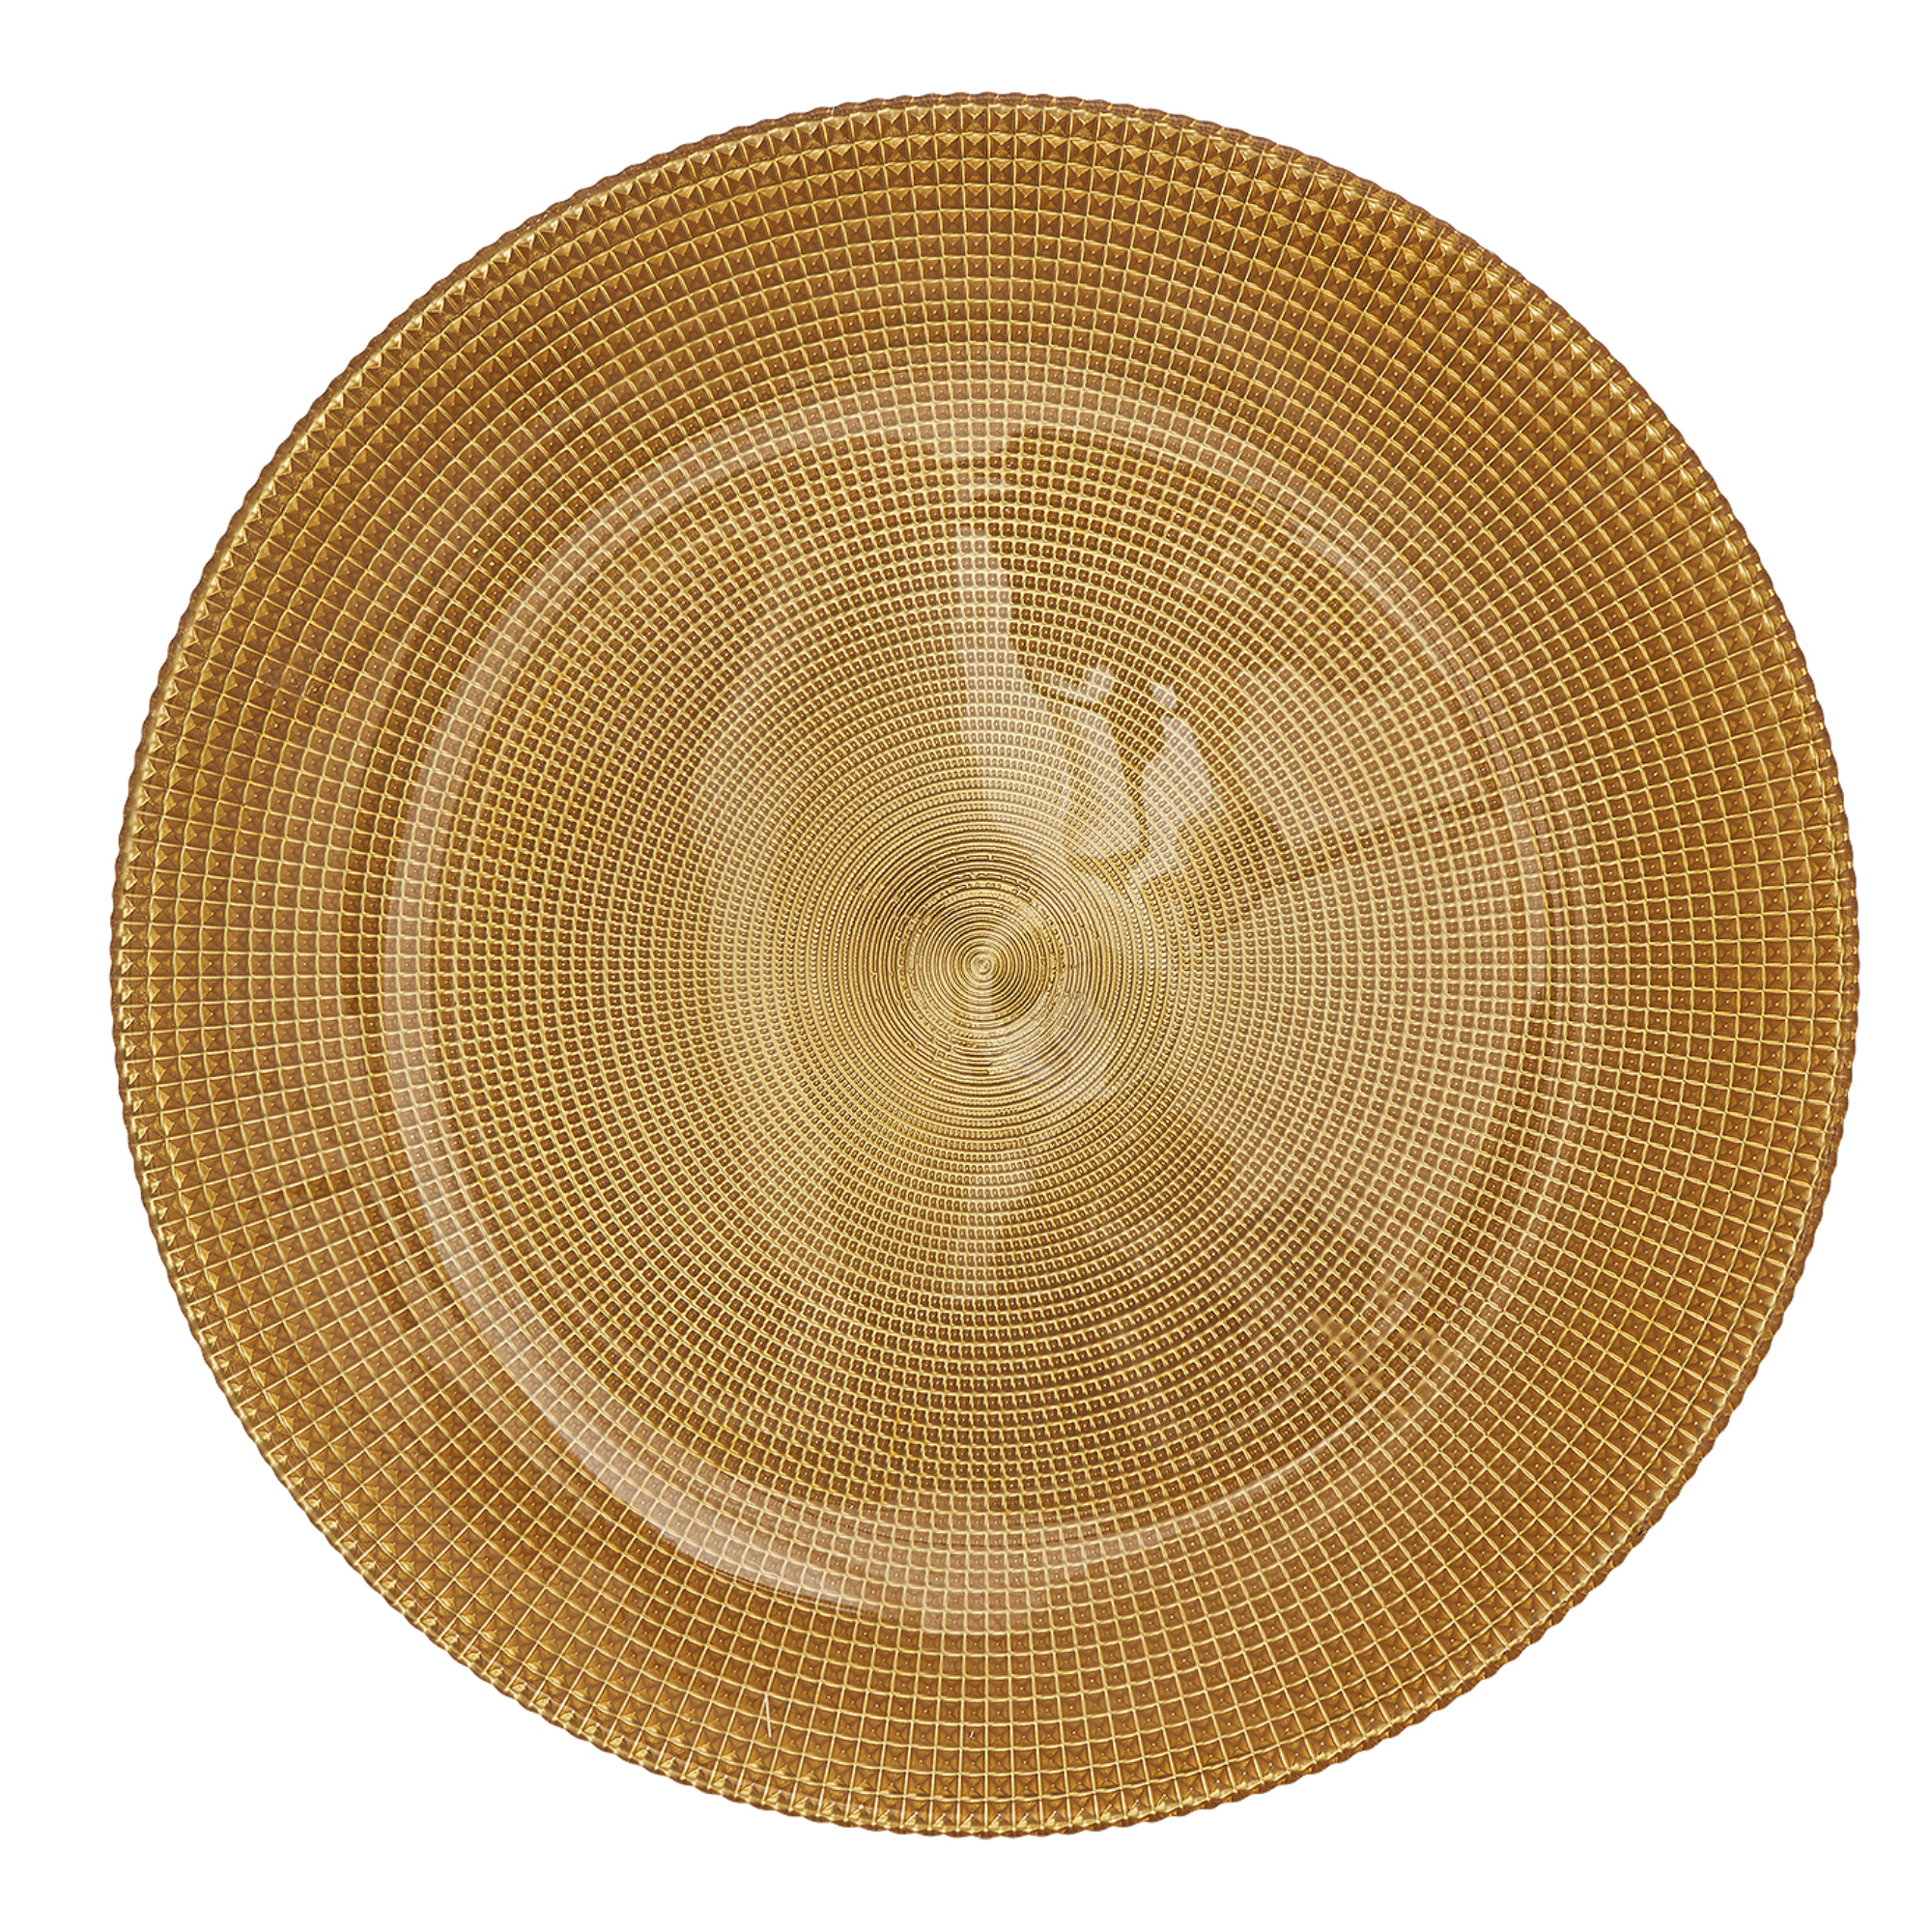 Basket Stitch Glass Charger Plate 13" - Gold